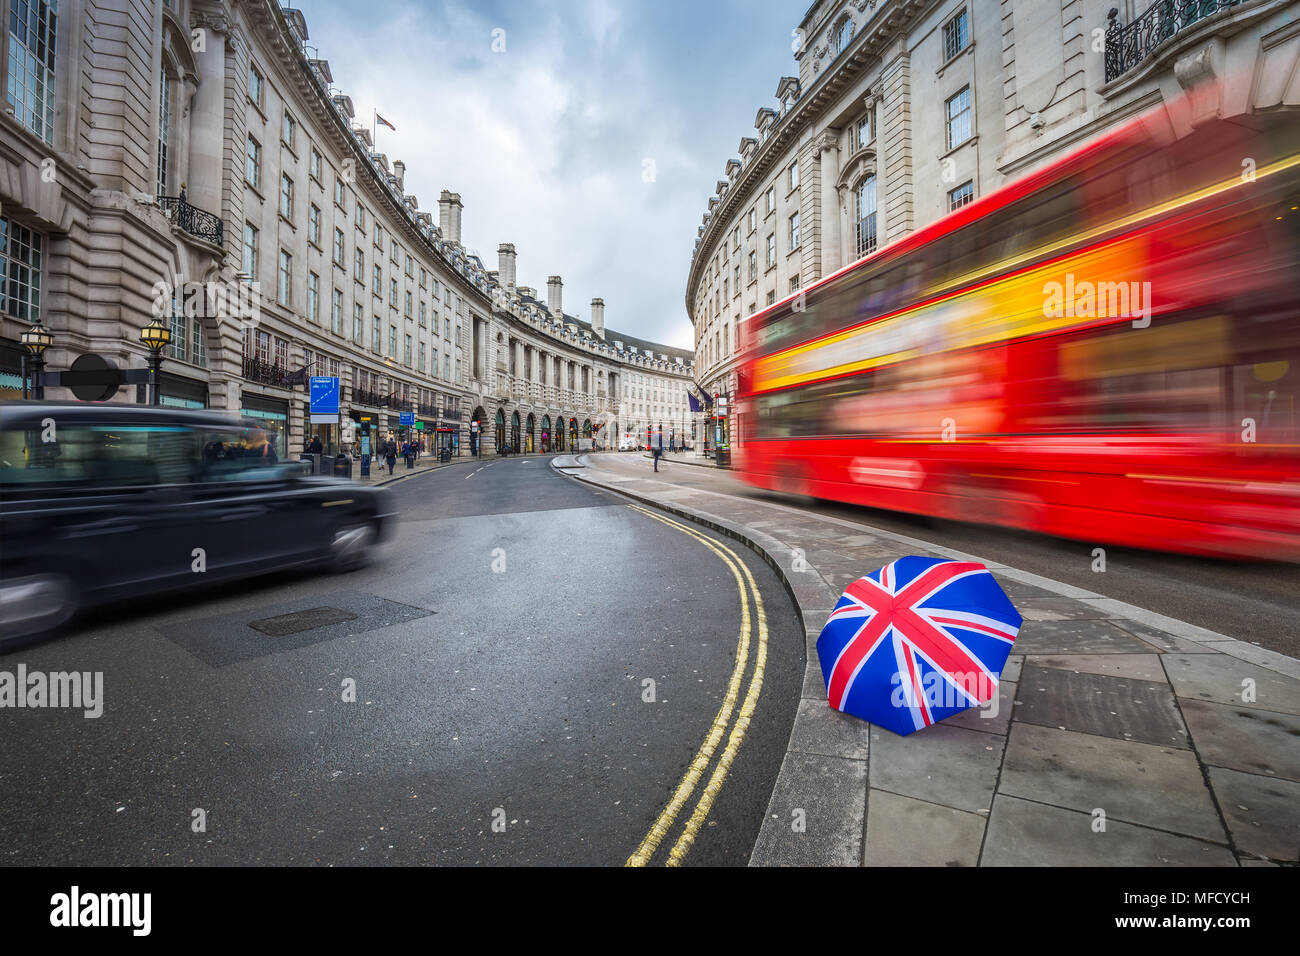 London, England - Iconic red double-decker bus and black taxi on the move on Regent Street with british umbrella Stock Photo